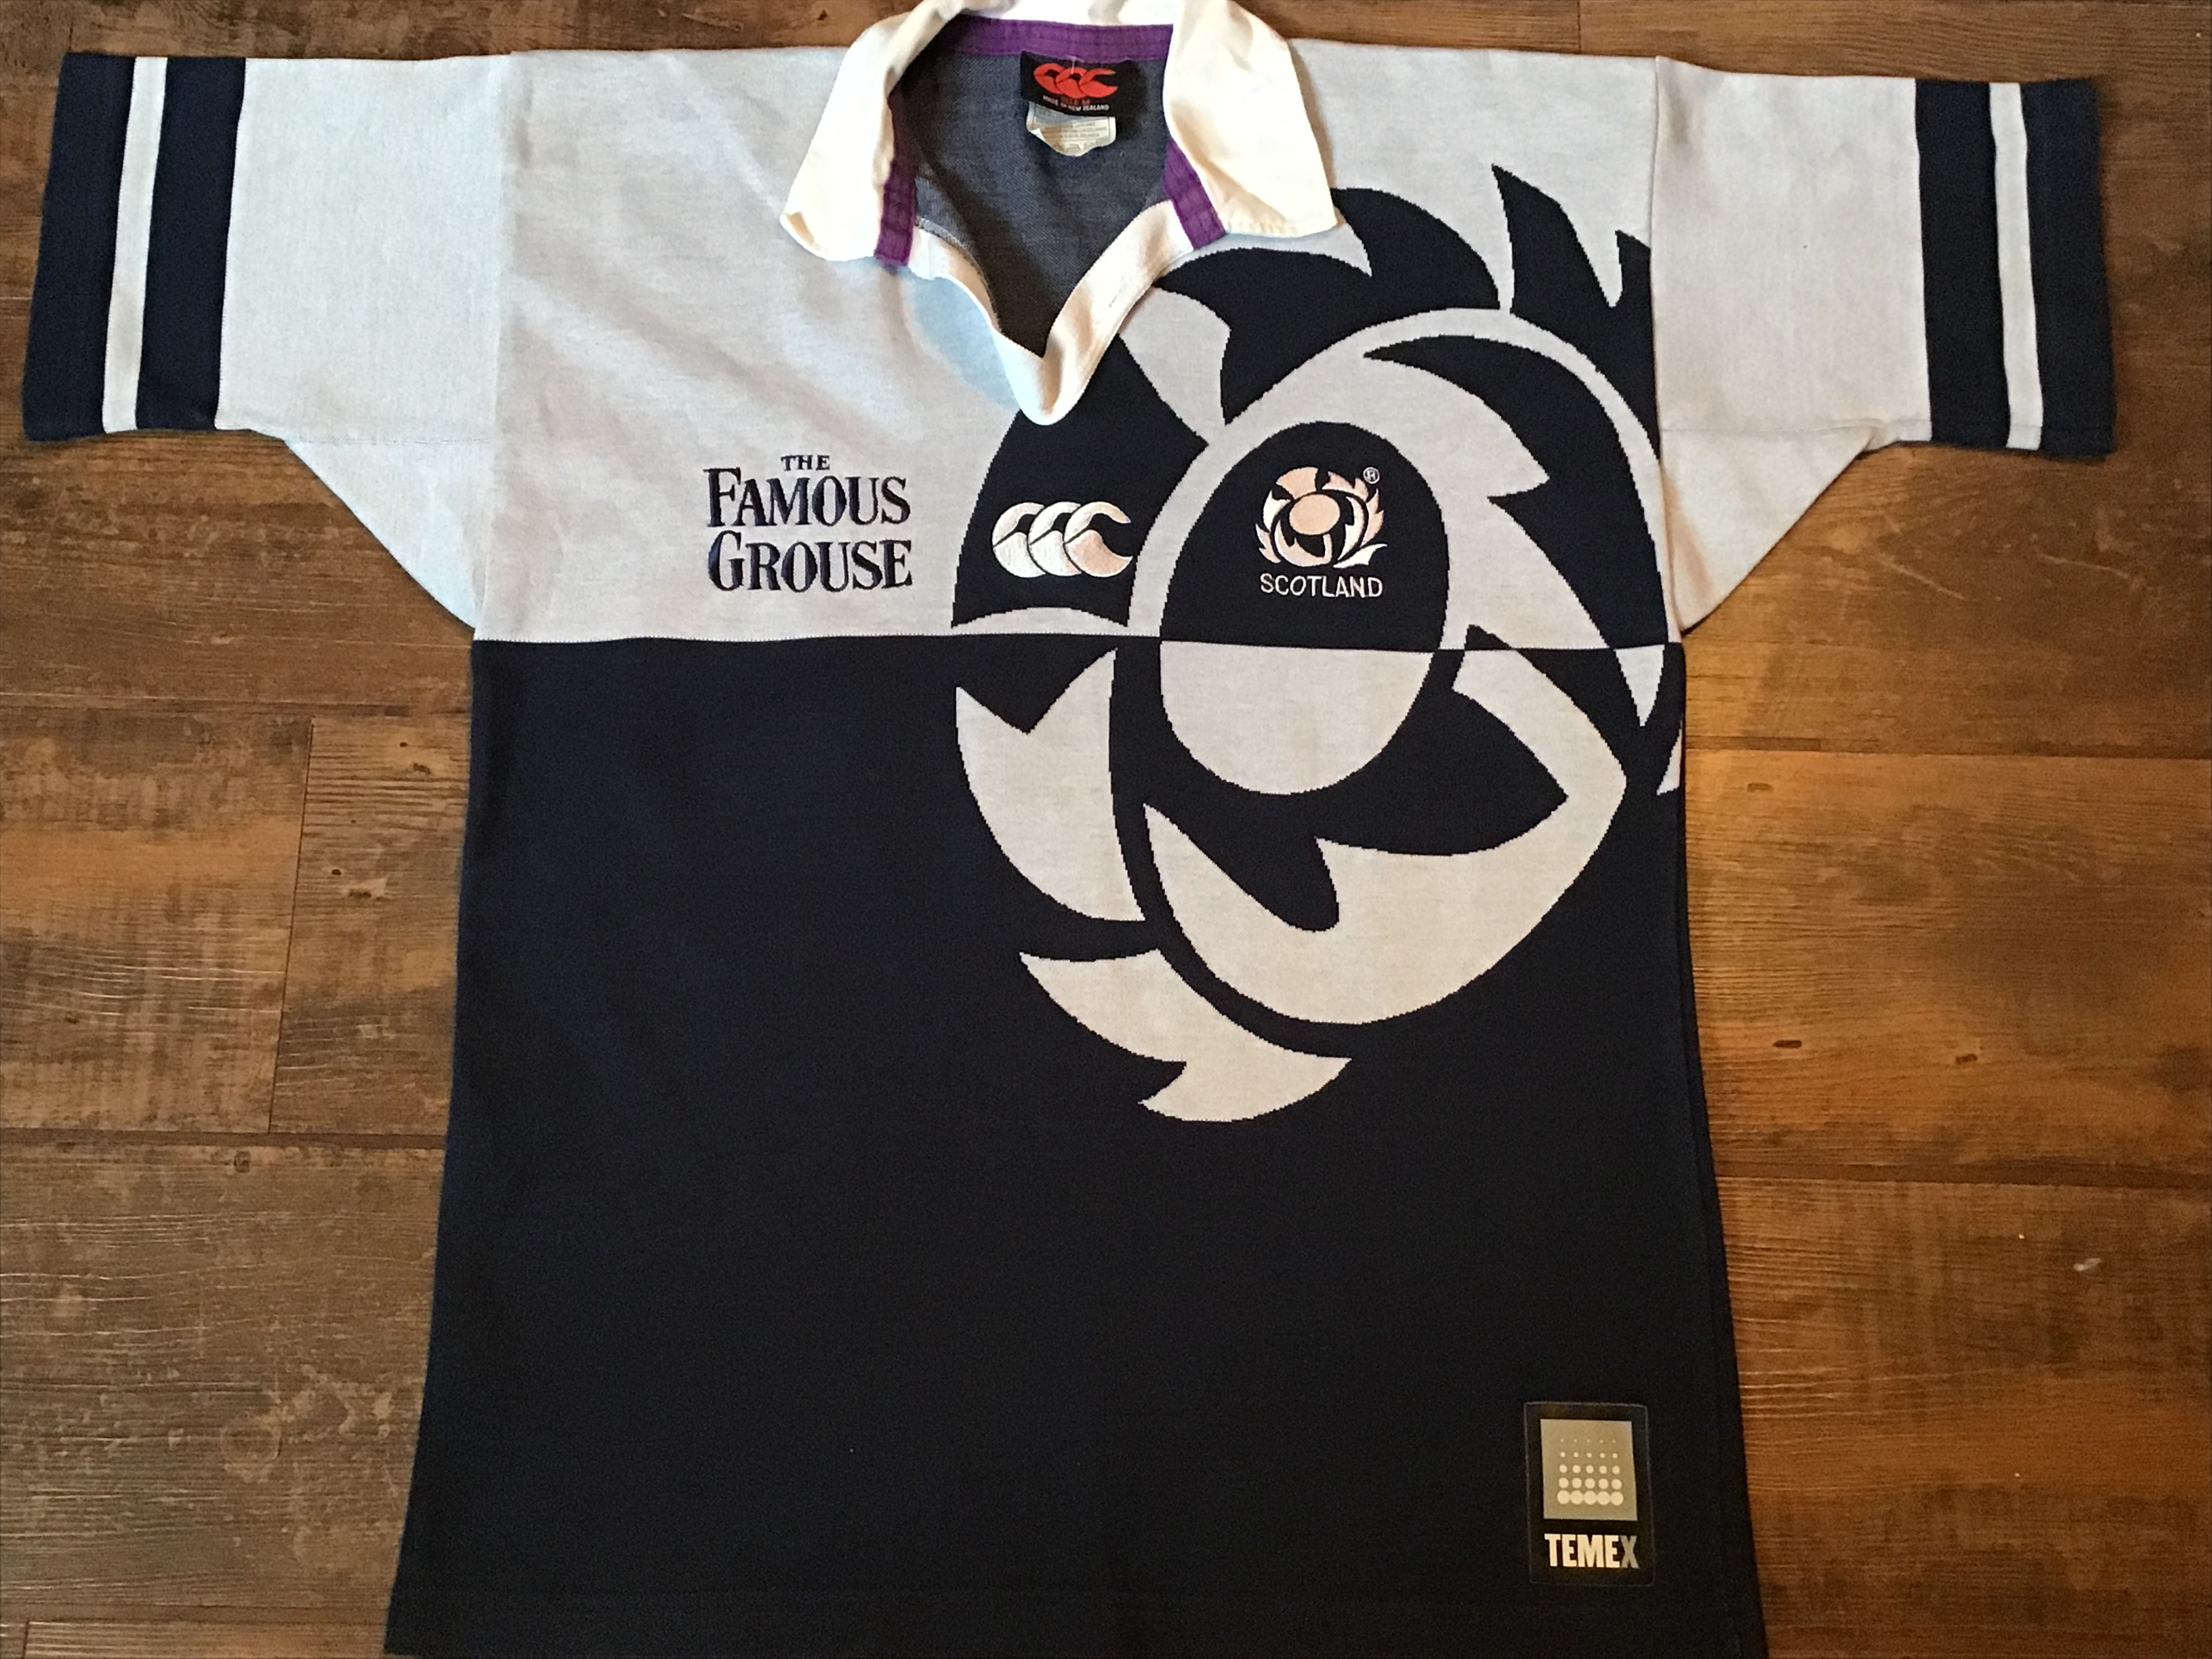 temex rugby jersey